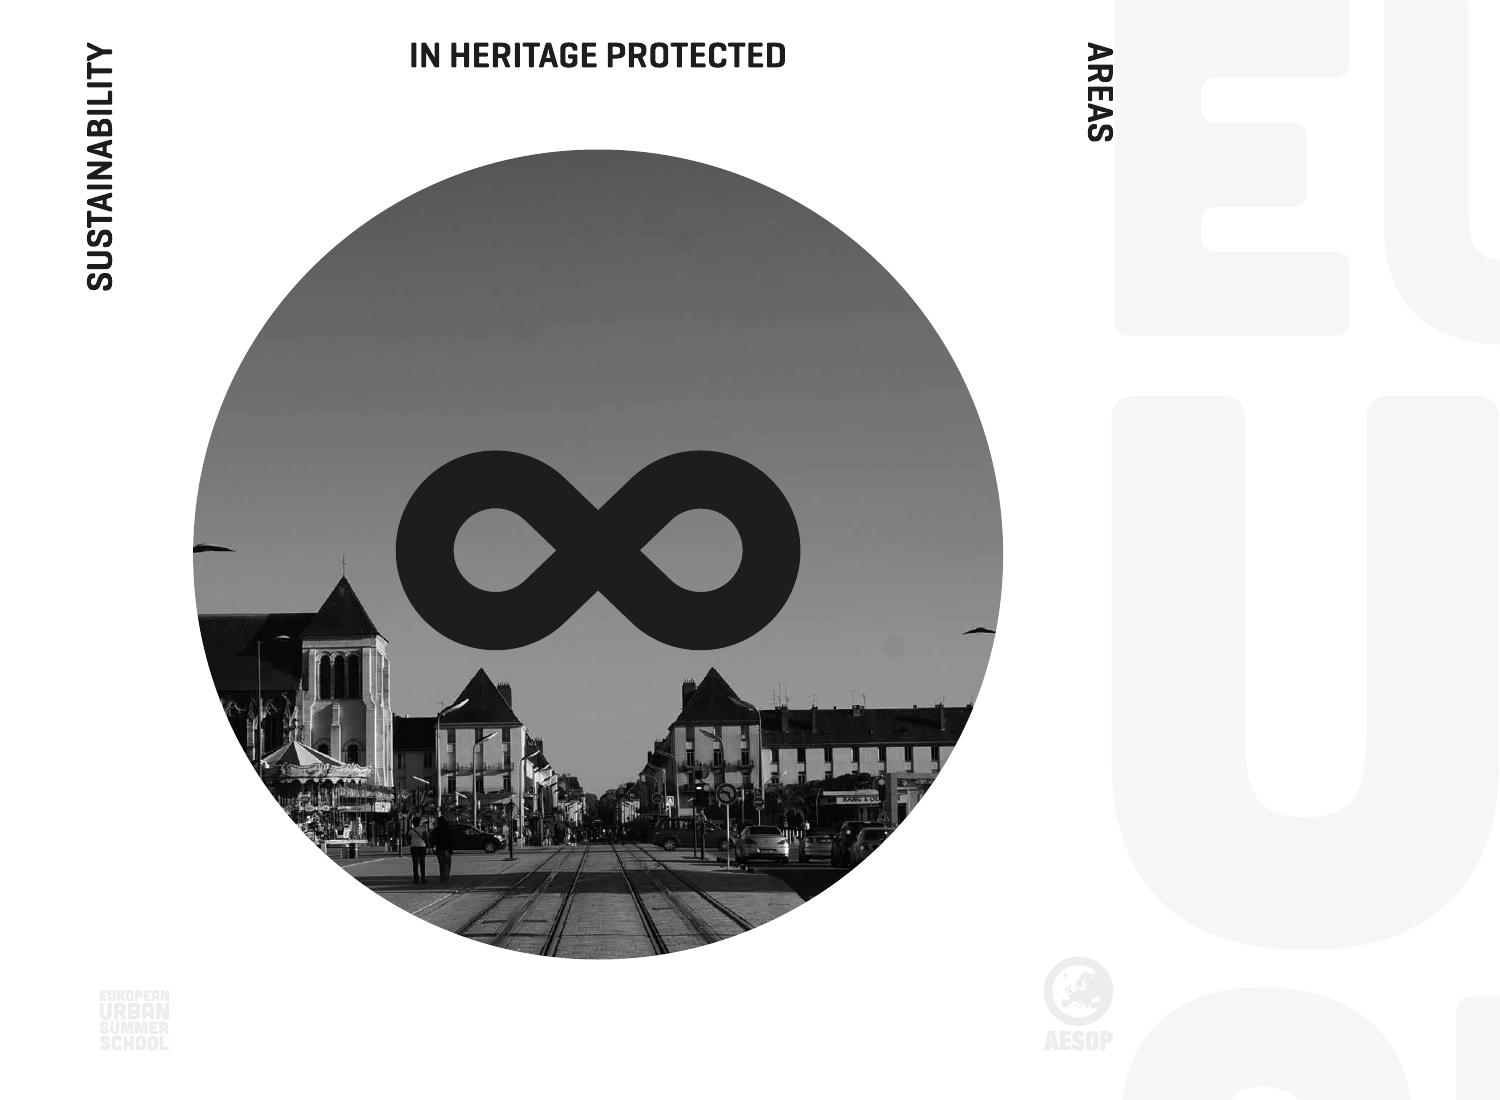 Salon De Jardin De Qualité Best Of Sustainability In Heritage Protected areas by Haveasign issuu